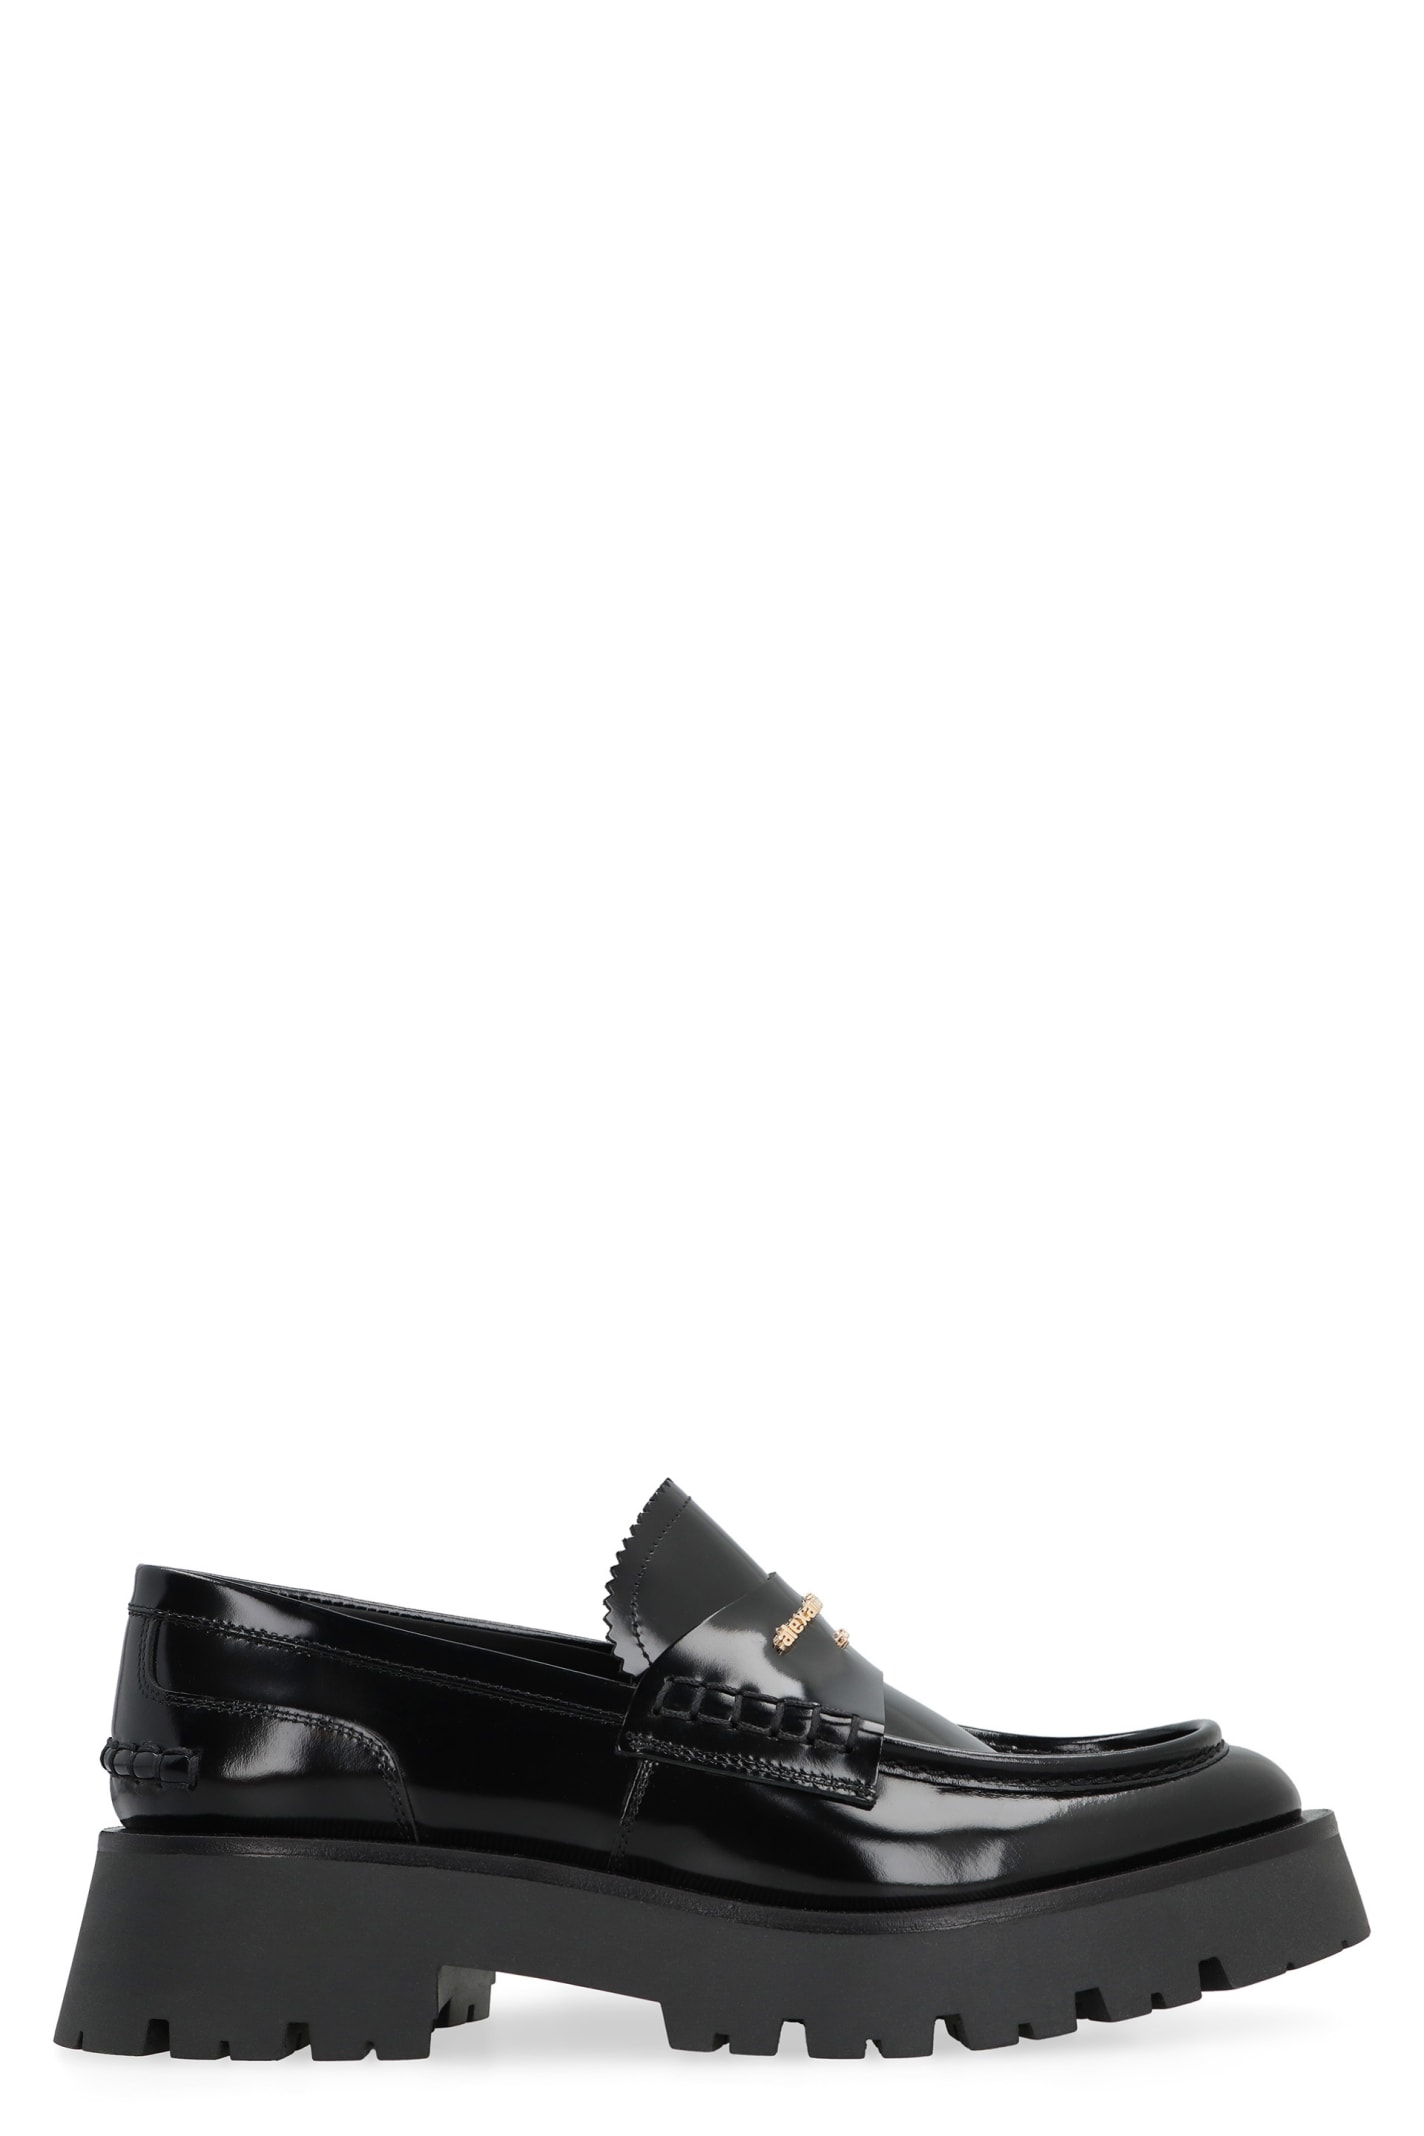 Alexander Wang Carter Leather Loafers In Black